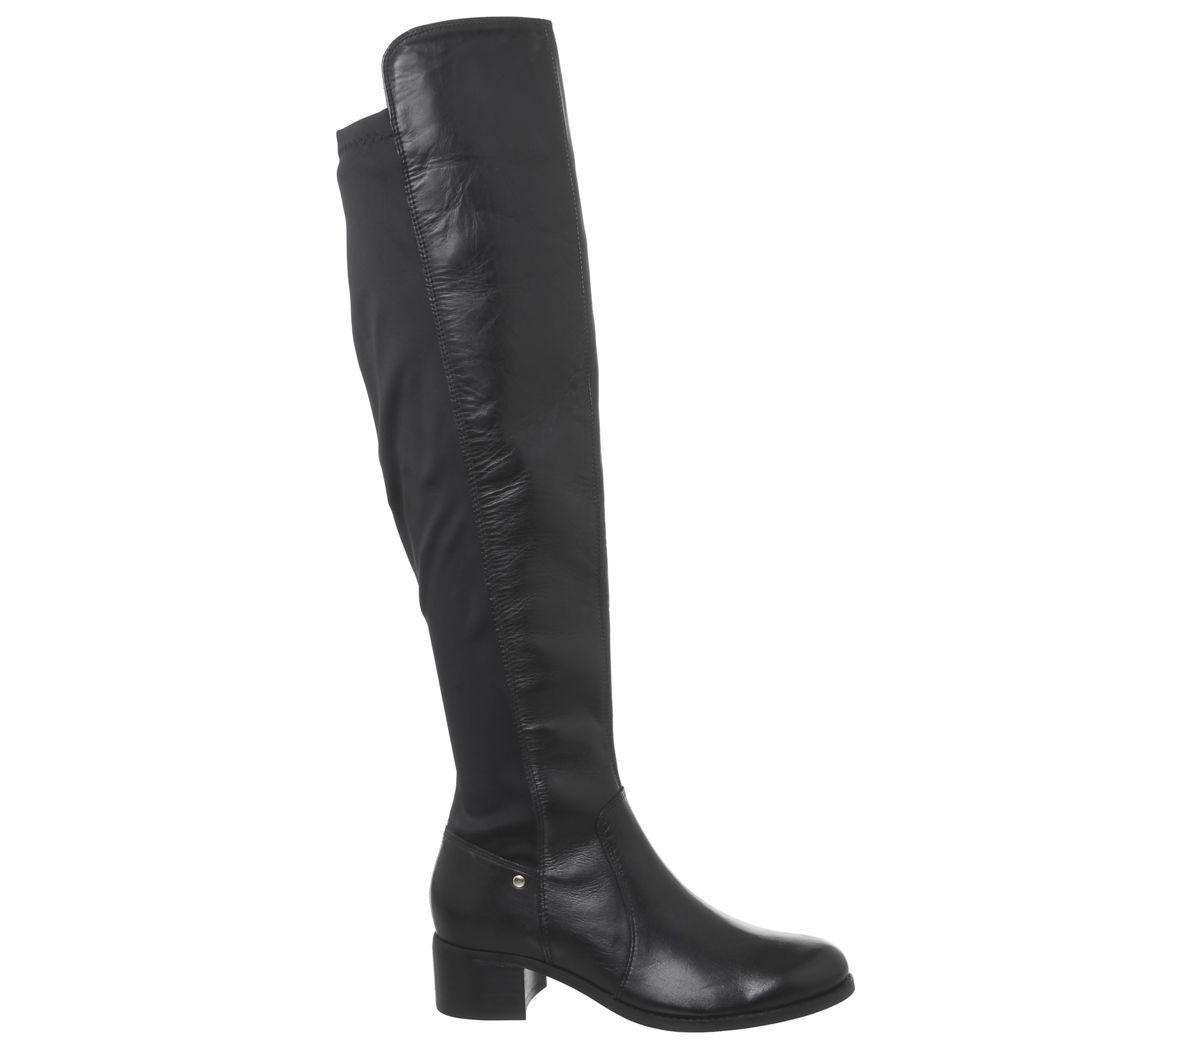 Office Kite Stretch Back Over The Knee Boots Black Leather Knee High Boots